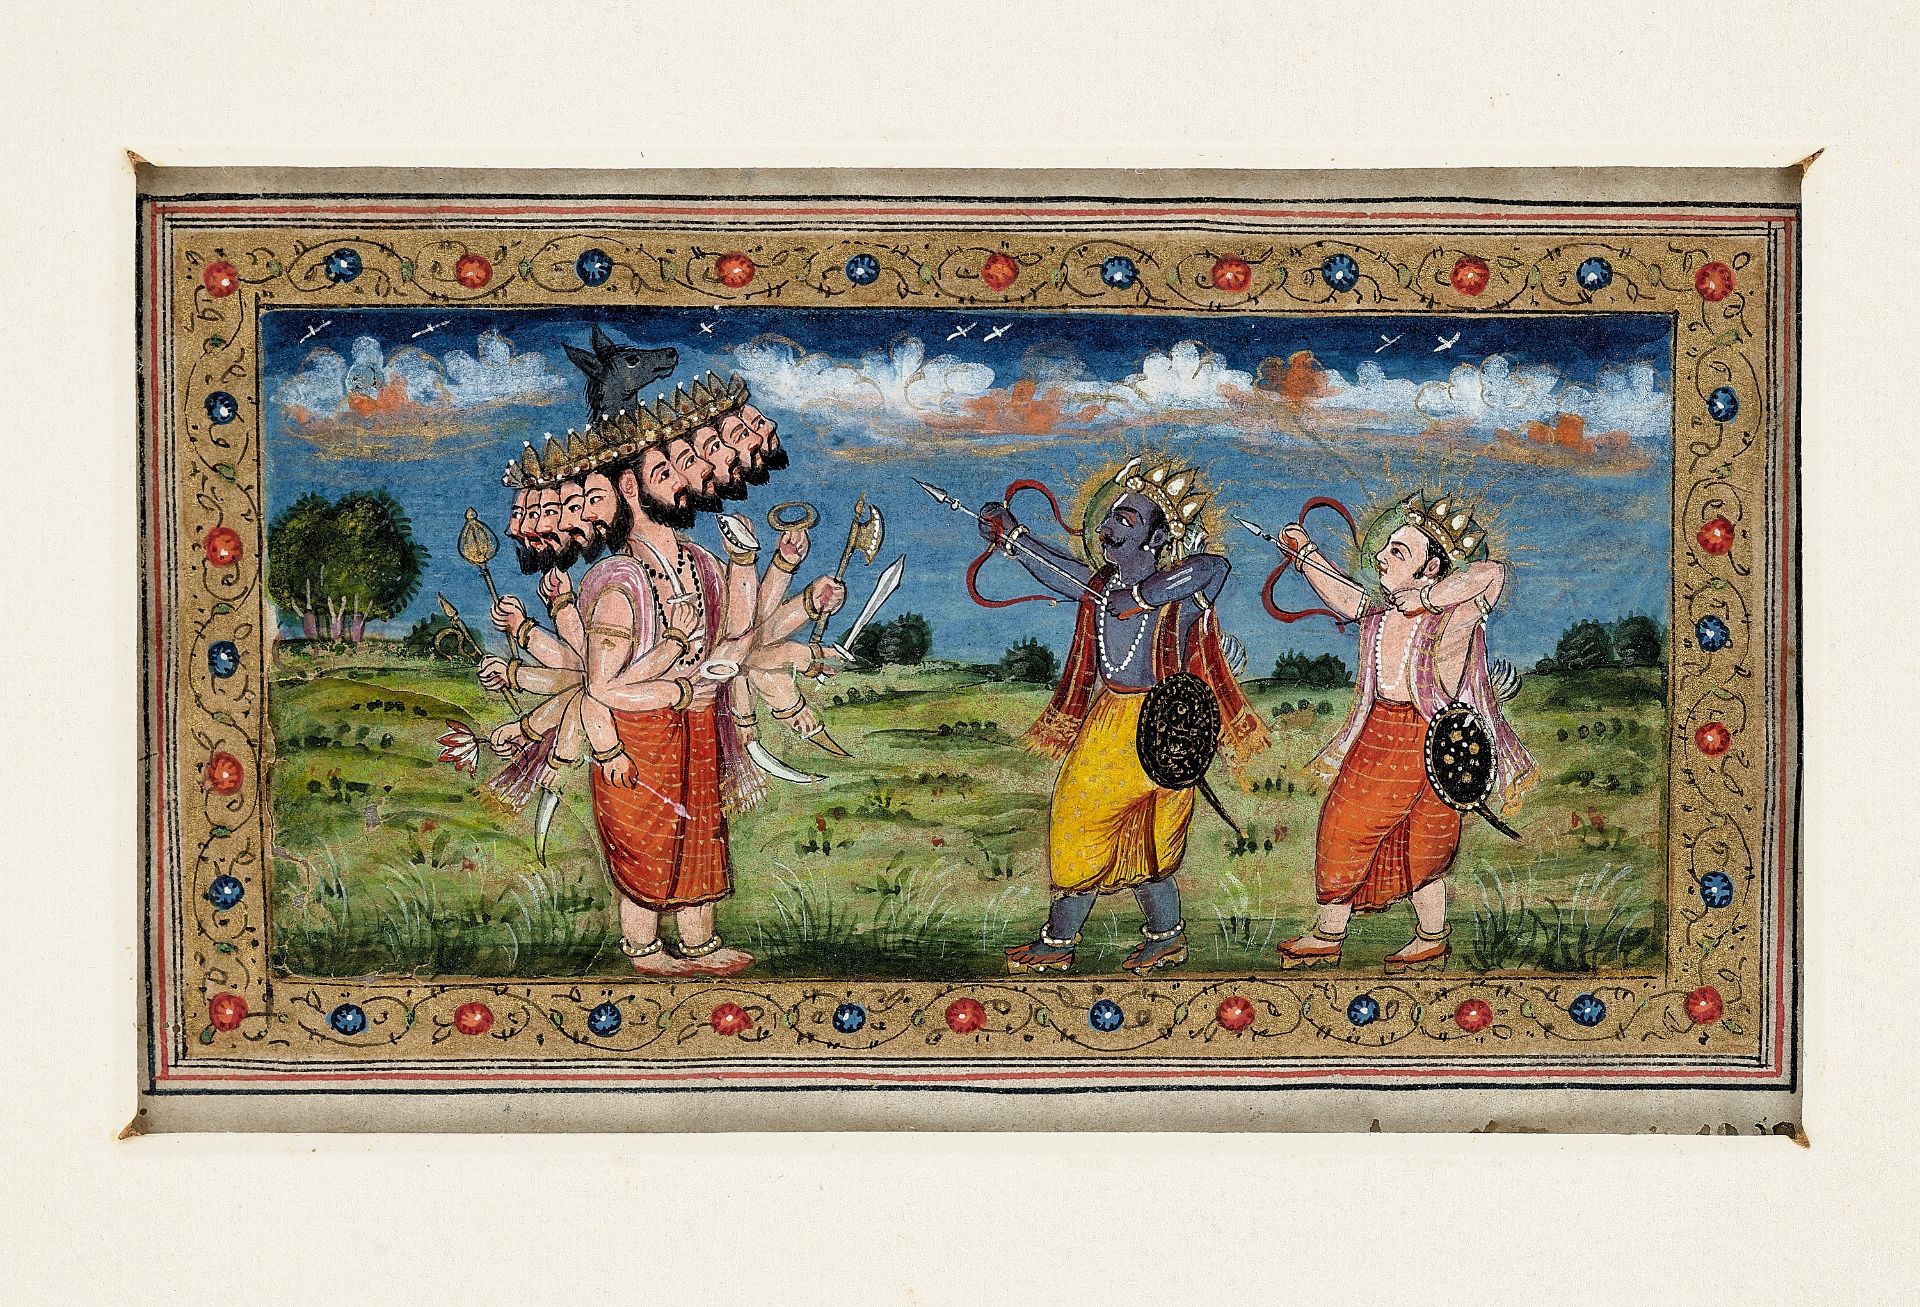 A RARE GROUP OF 27 FOLIOS FROM A MANUSCRIPT, KASHMIR 18TH CENTURY - Image 9 of 15